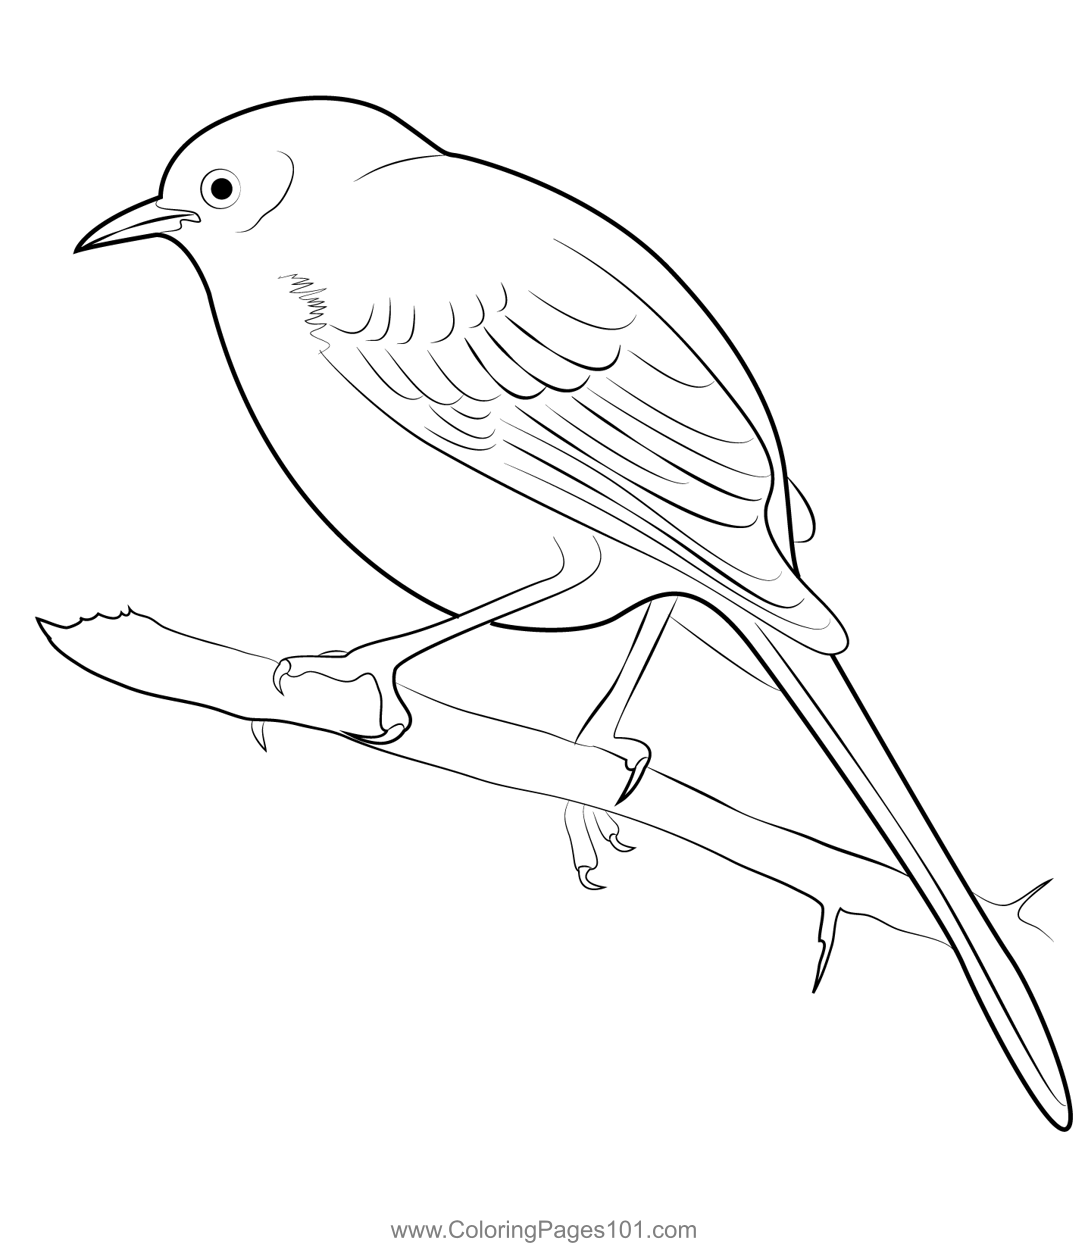 Longtailed Mockingbird Coloring Page for Kids - Free Mockingbirds ...